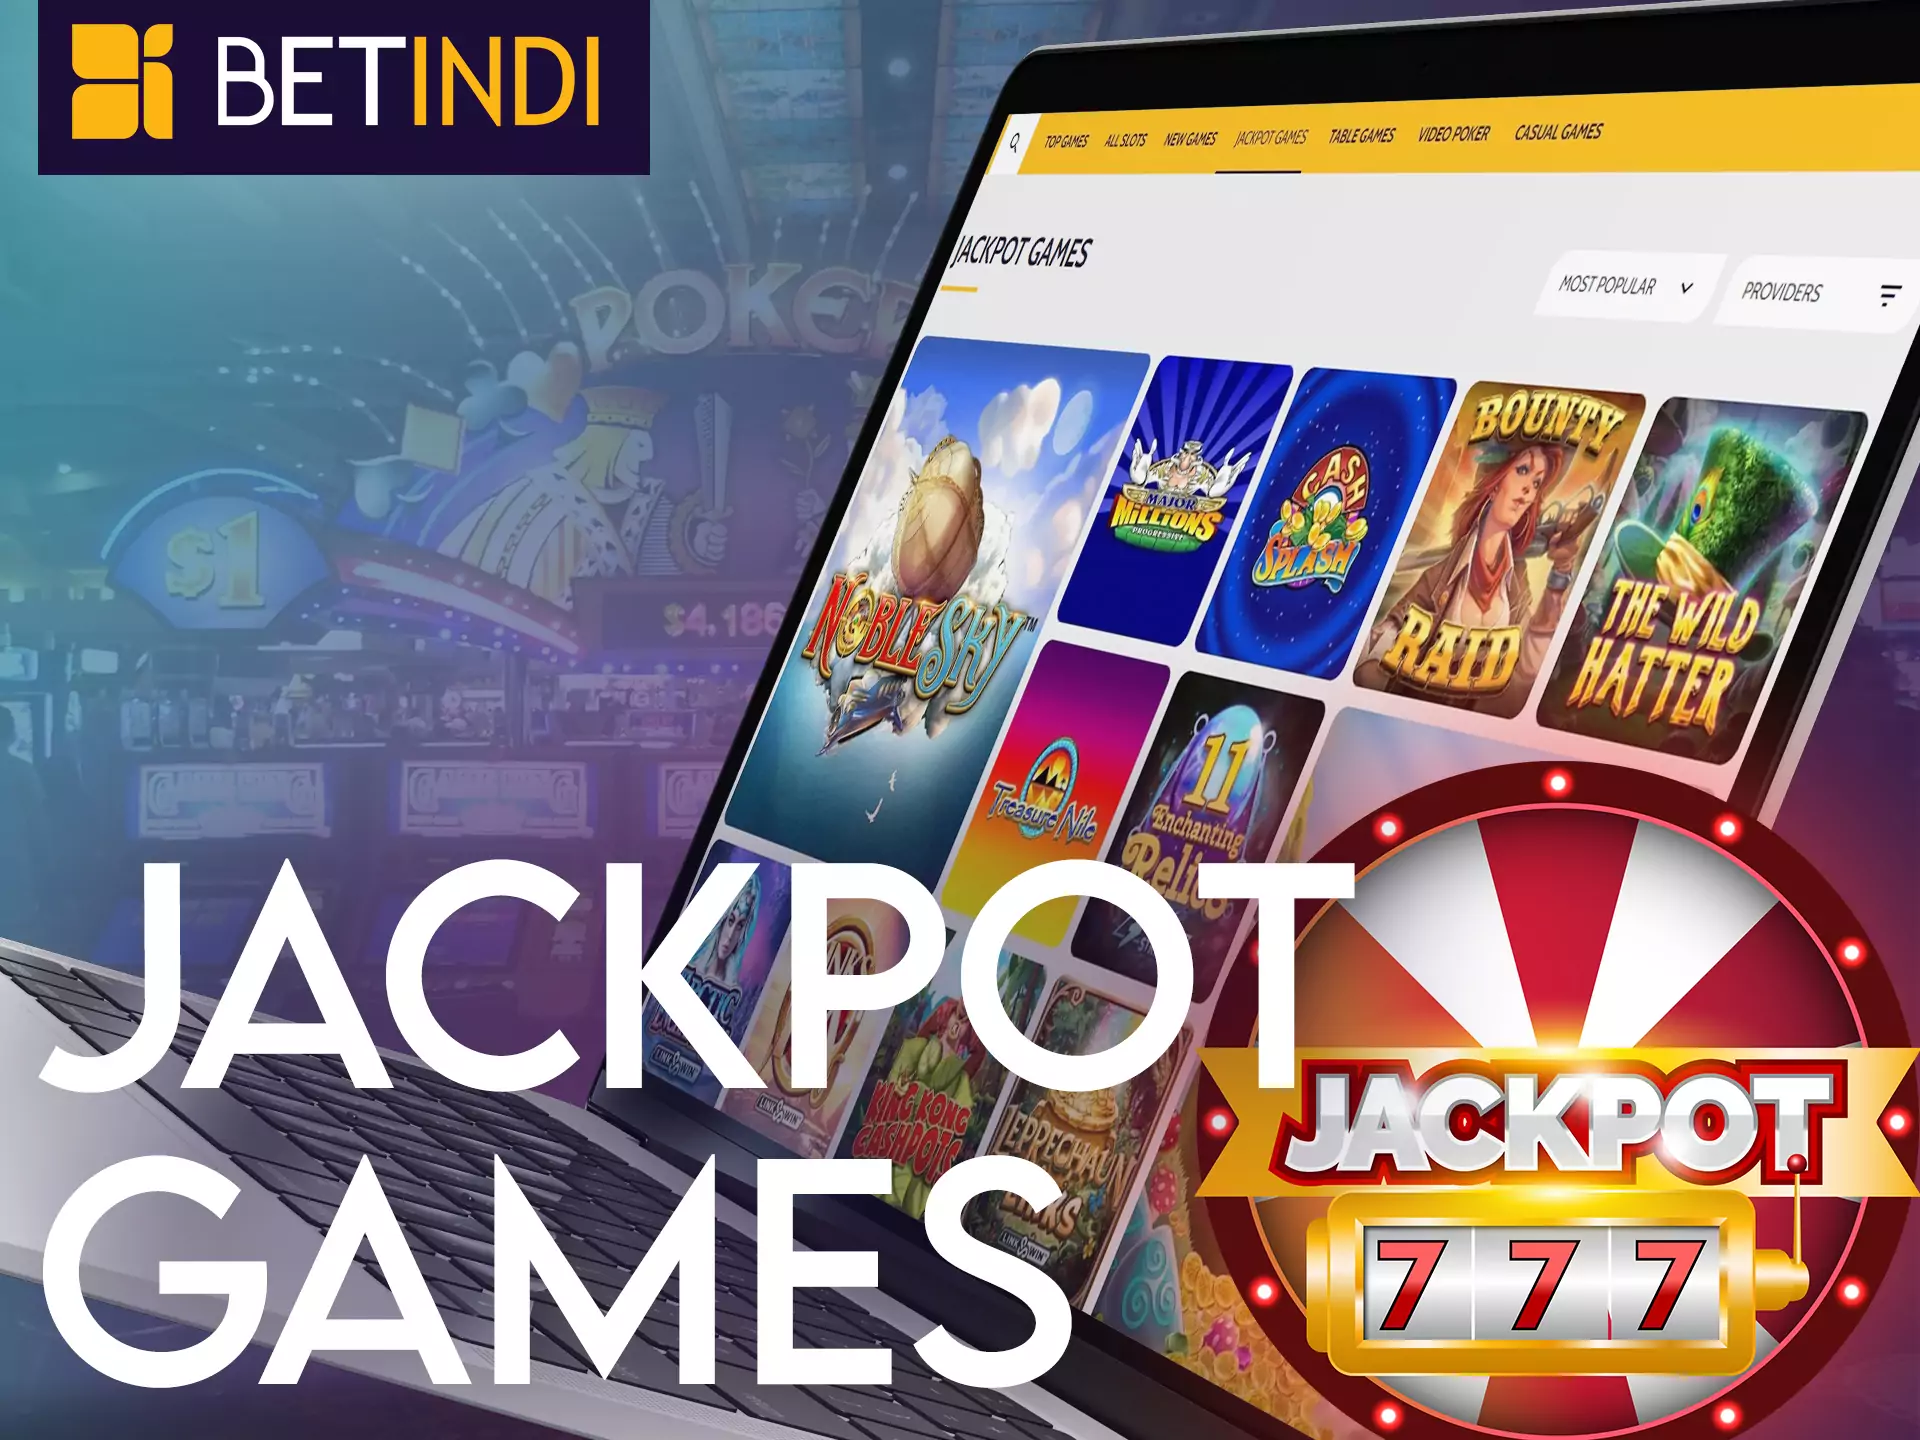 Try your luck at the jackpot casino games from Betindi.